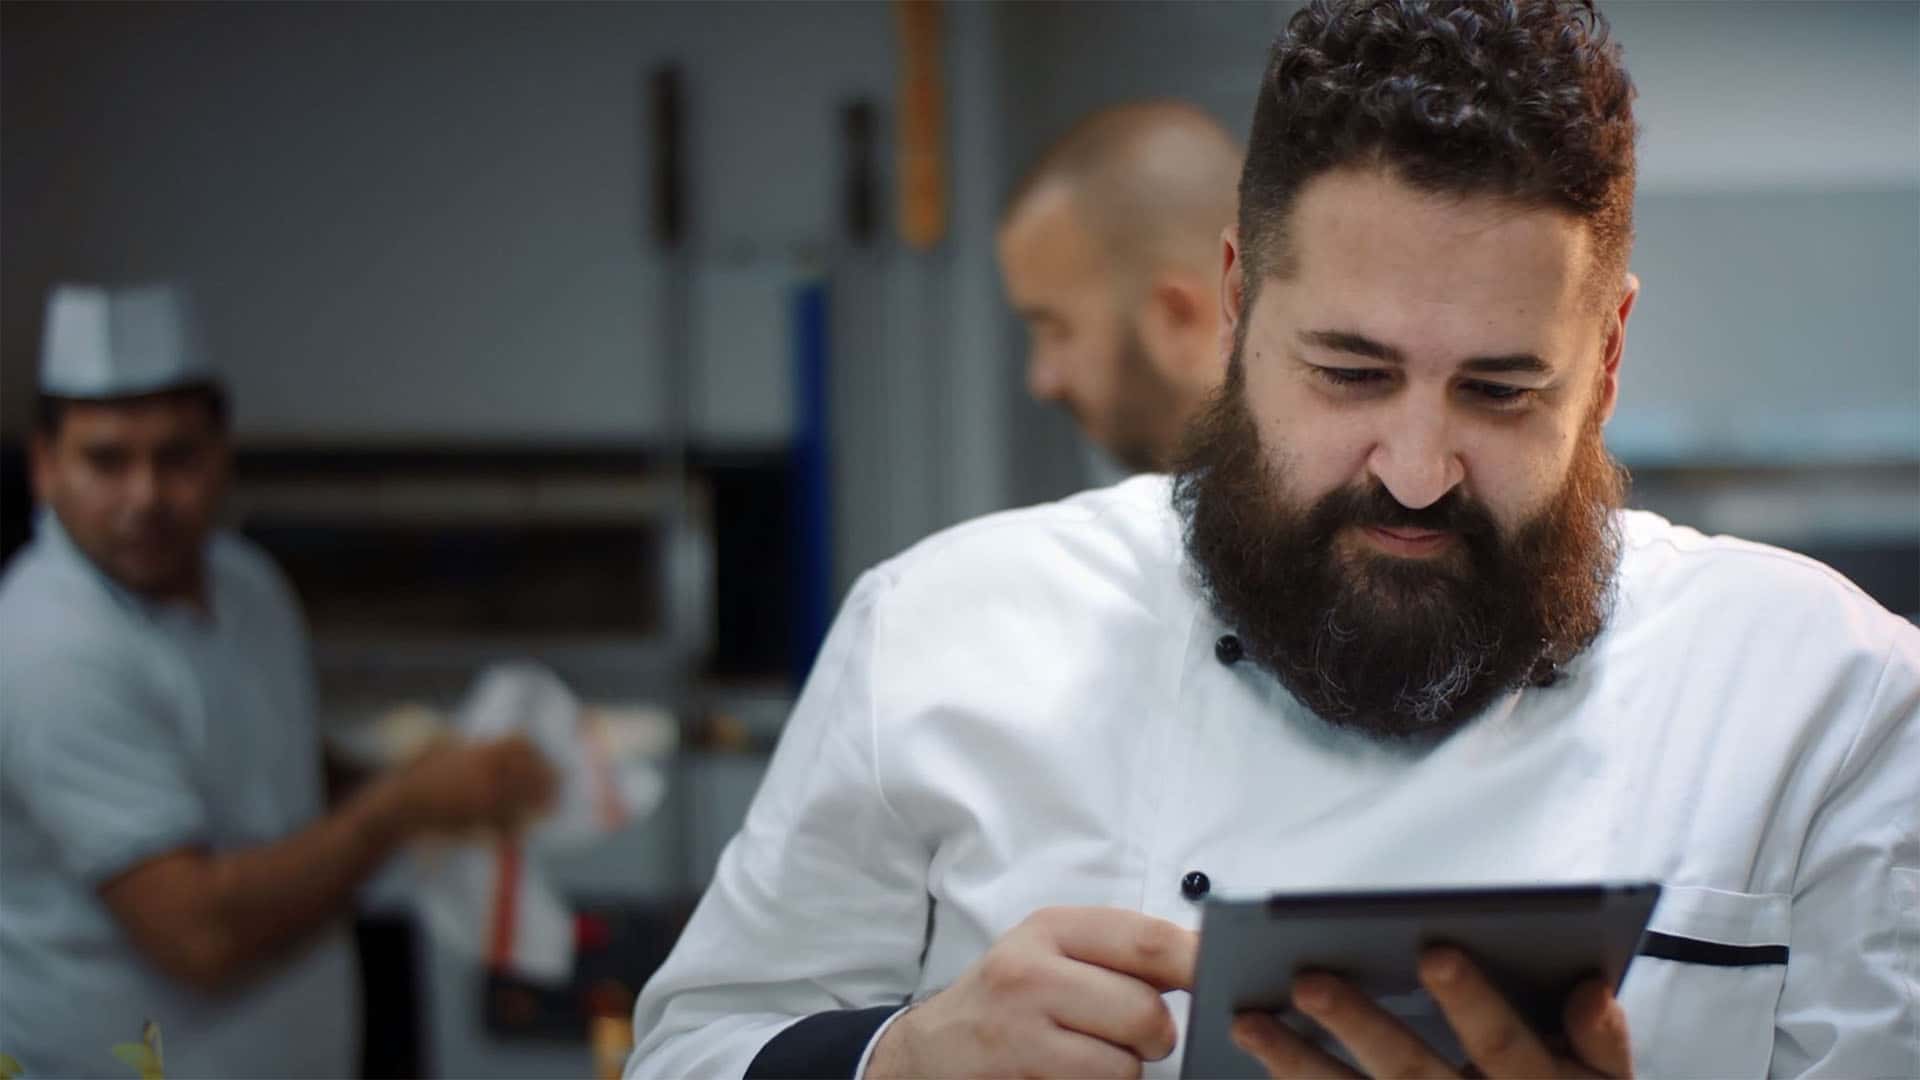 Executive chef in the kitchen who is using a tablet to control his smart commercial oven